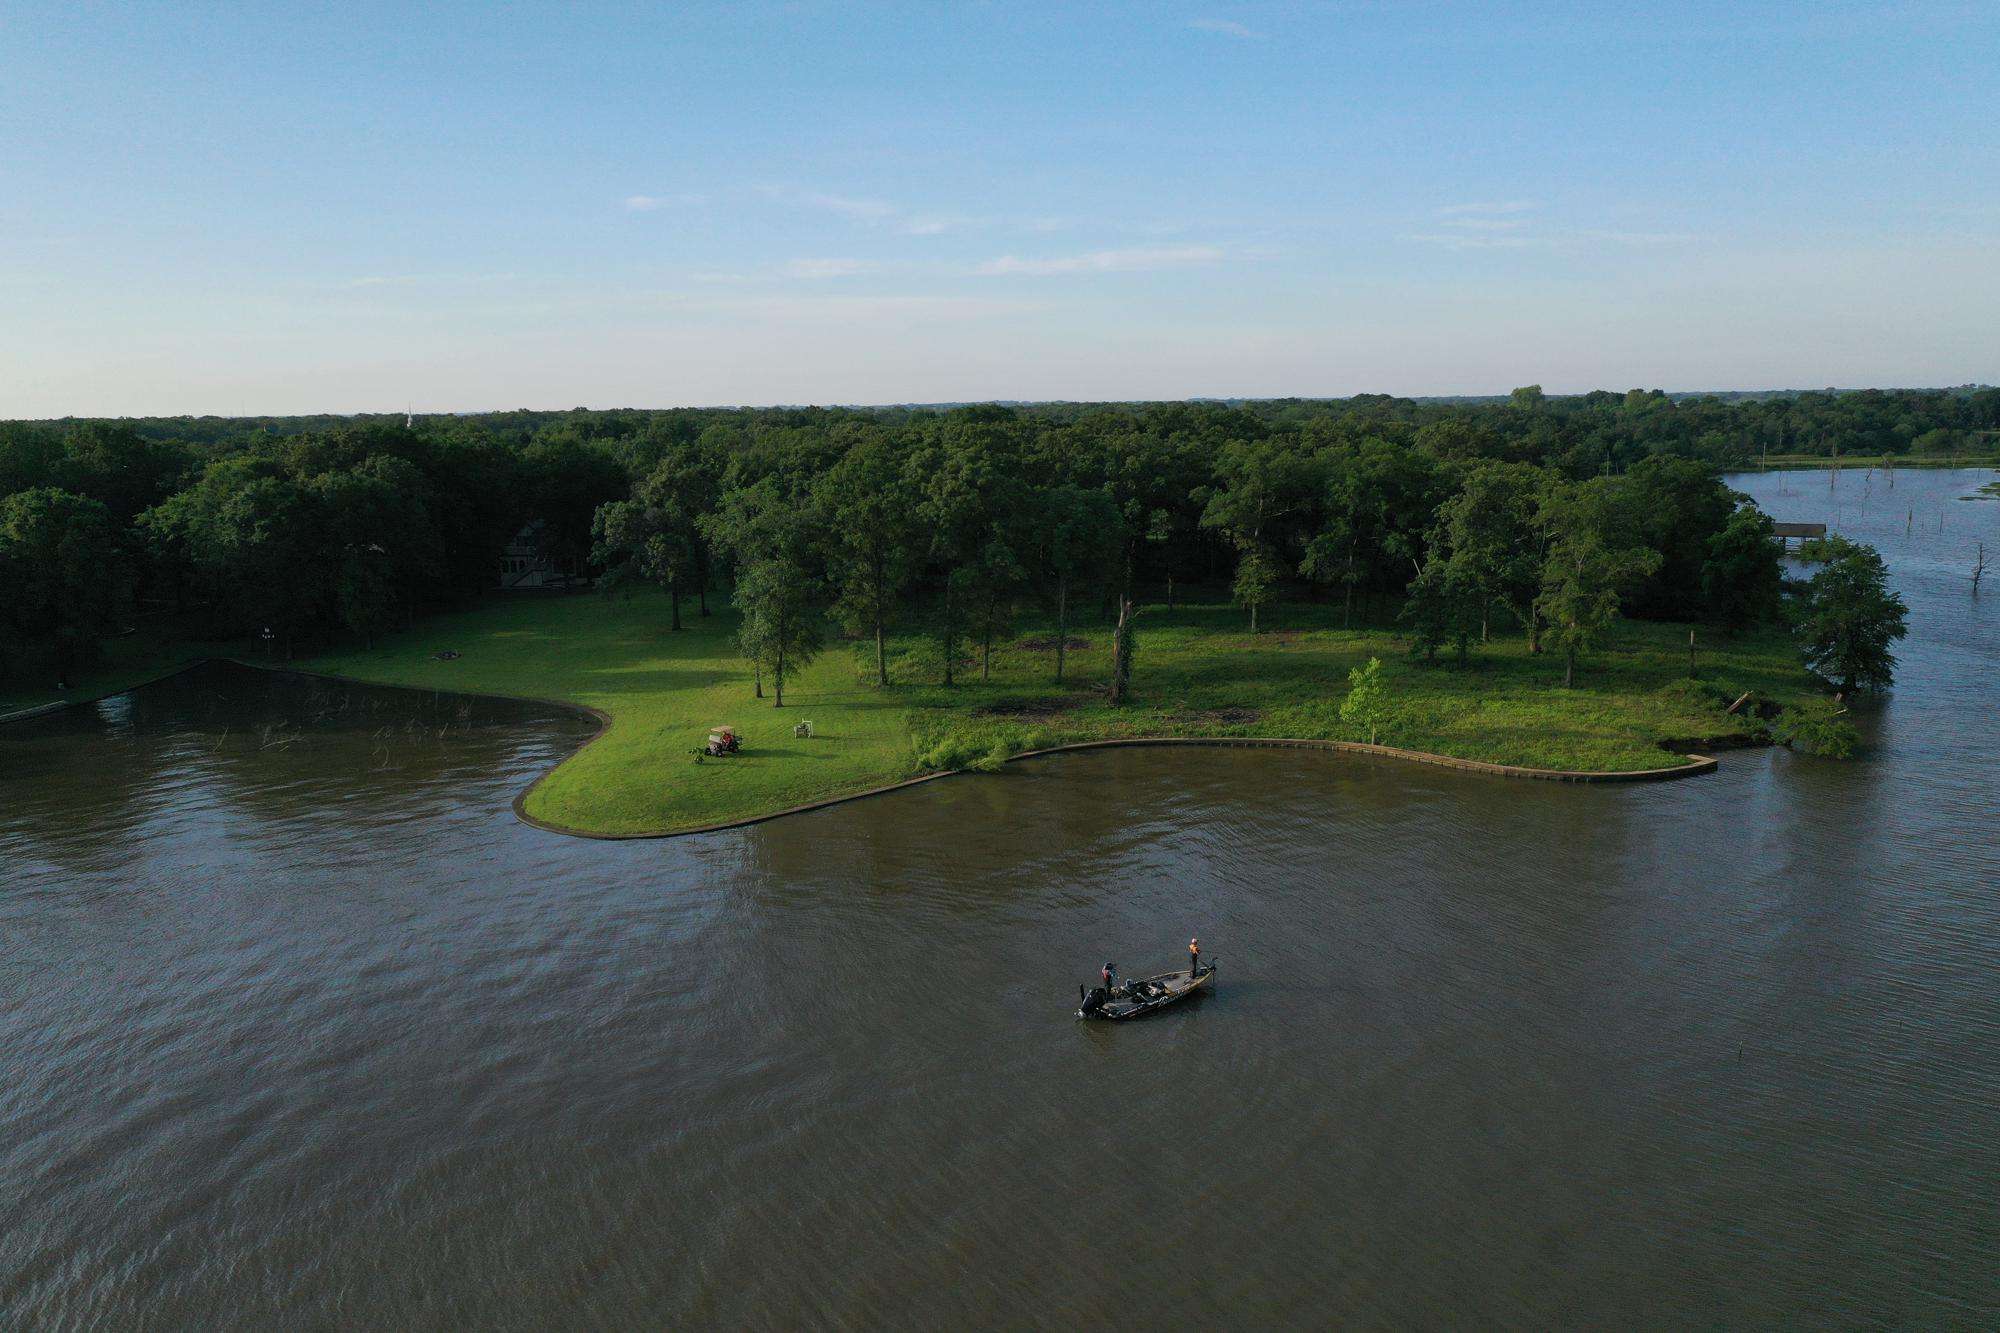 Enjoy an aerial view of the top fishing spots that produced the Top 10 bags at the 2019 Toyota Bassmaster Texas Fest benefiting Texas Parks & Wildlife Department. </p>
<br> Drew Benton caught quite a few big fish from this spot this week.